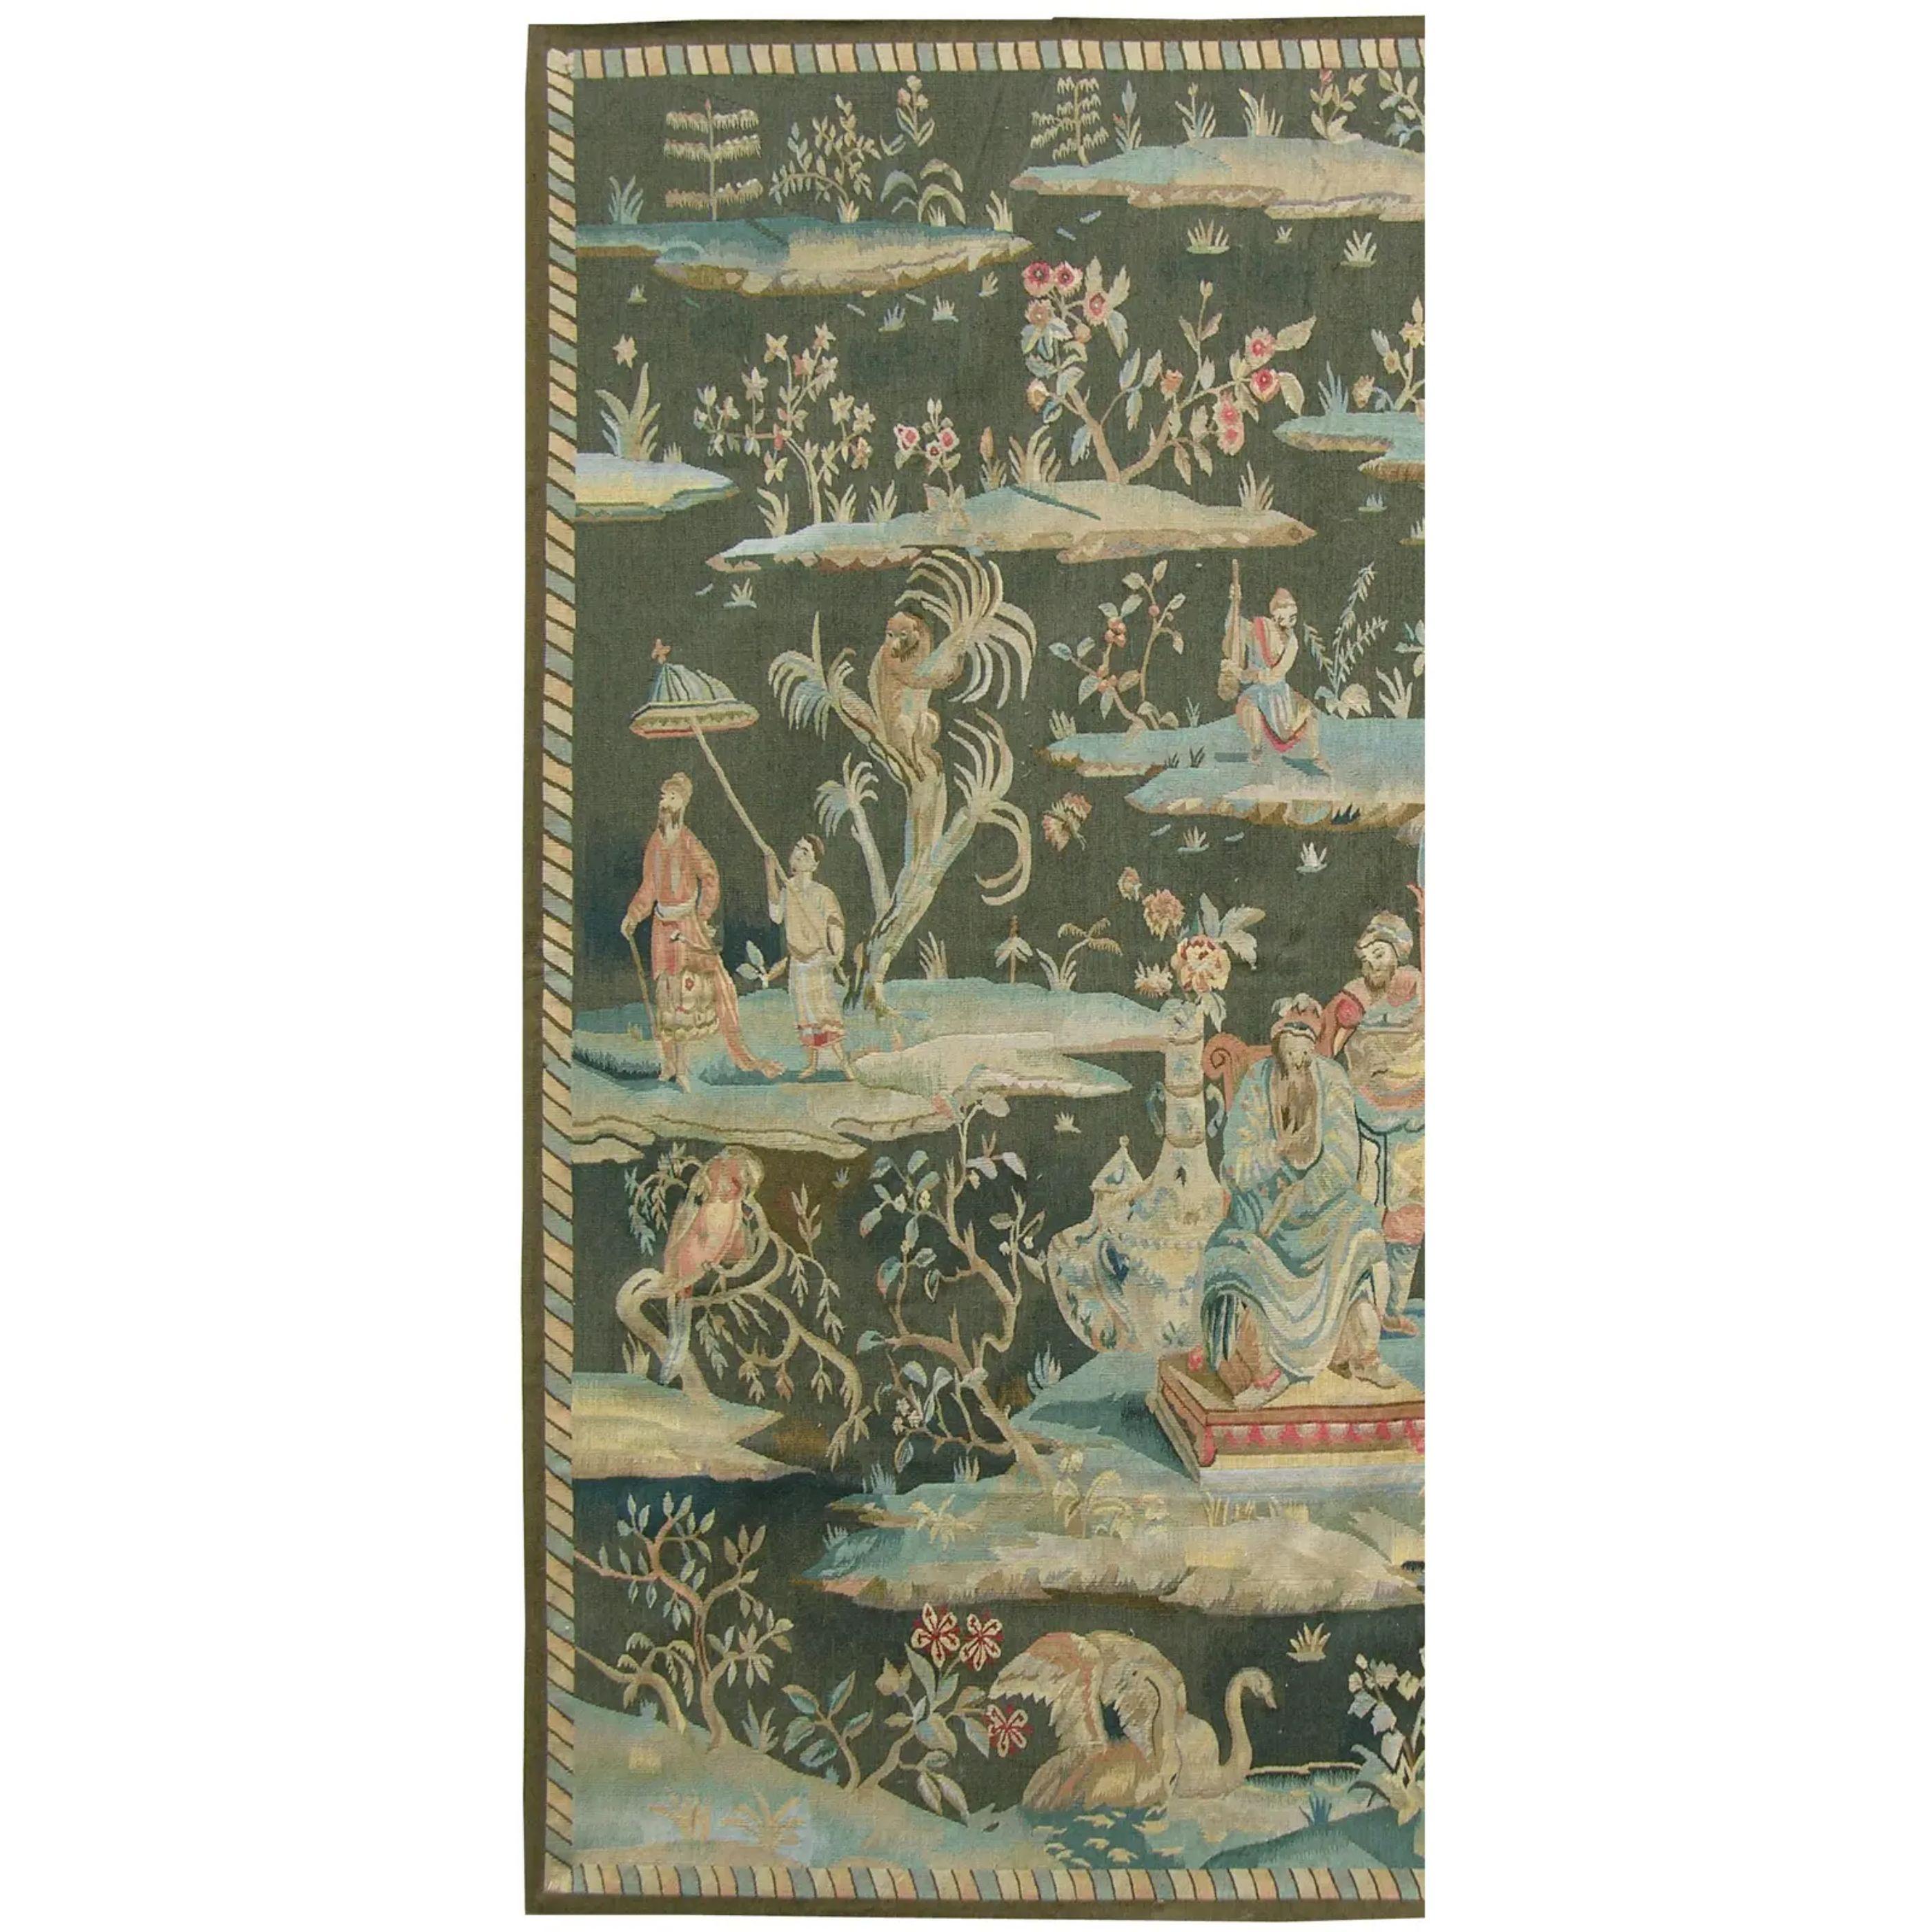 Unknown Vintage Tapestry Depicting Royal Figures on Islands 6.5X5.5 For Sale